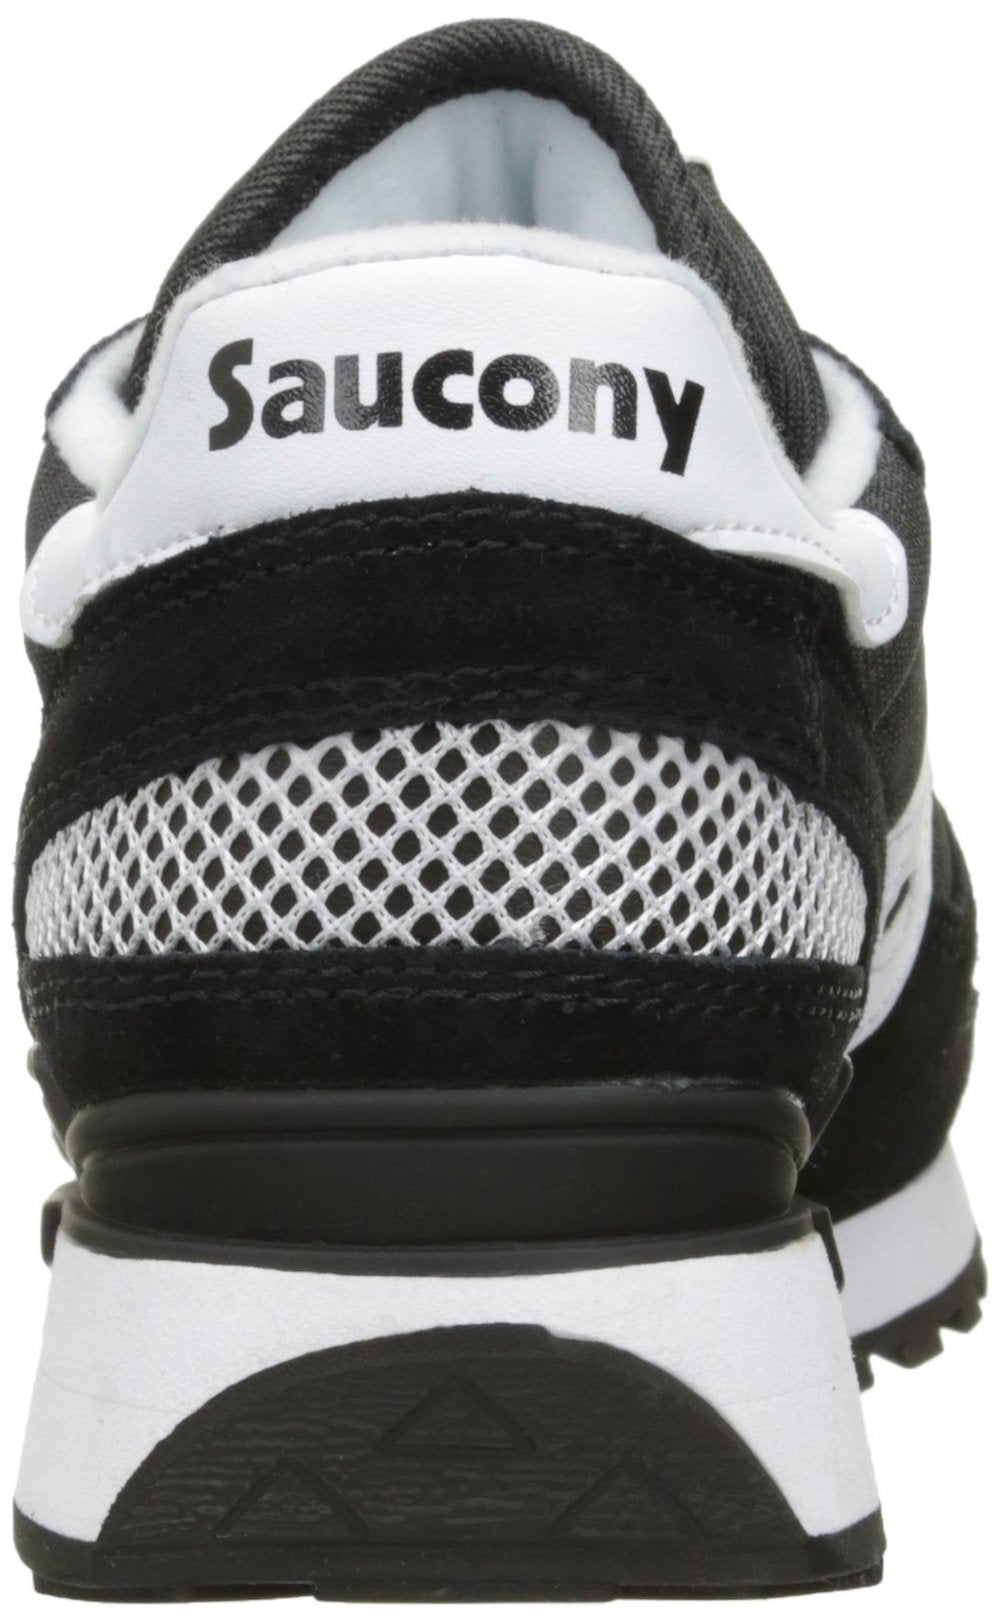 Saucony Shadow Original Black/White Men's Running Shoes 2108-518 - Sneakermaniany